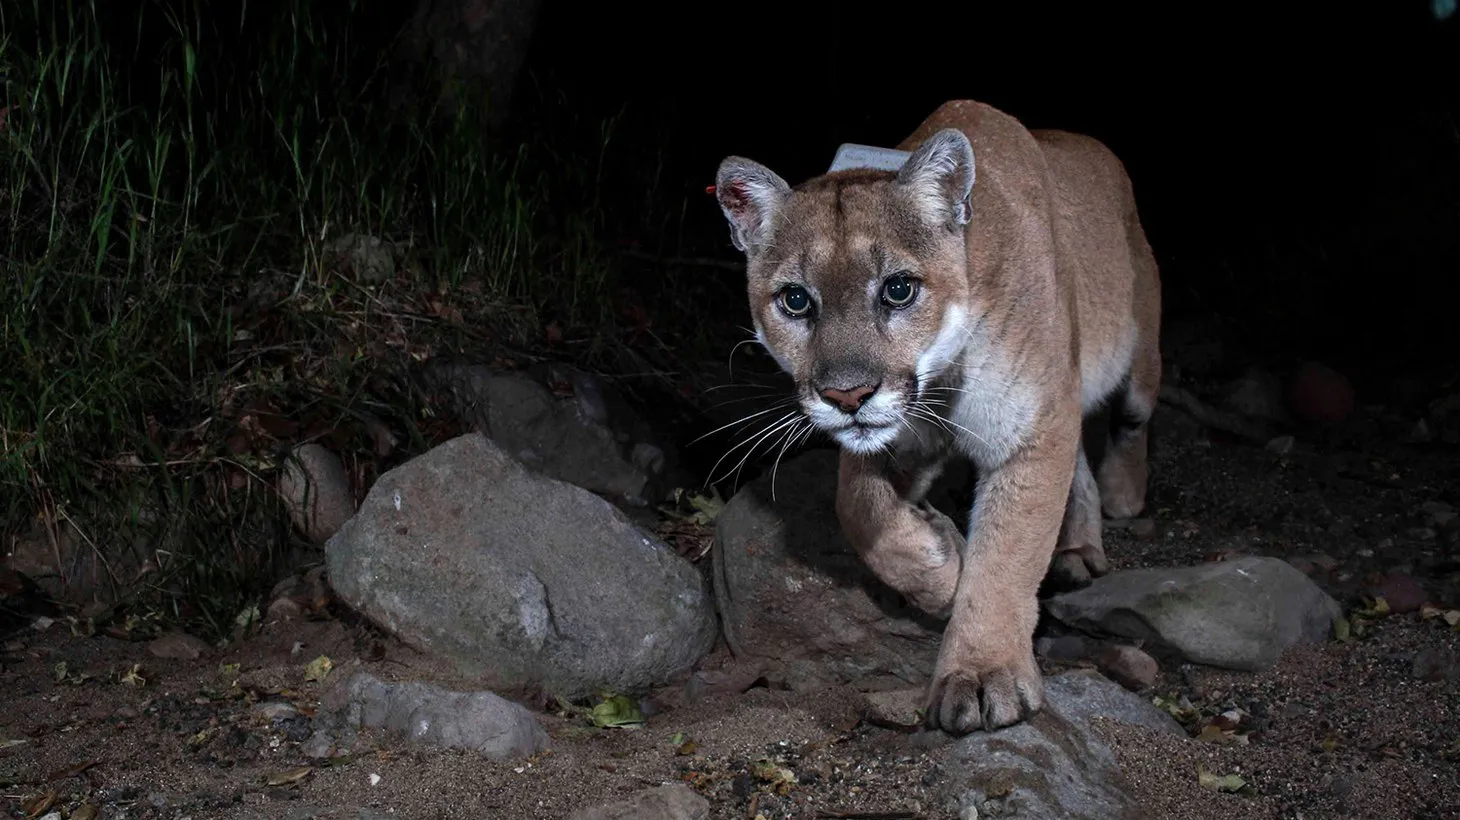 P-22, the beloved LA mountain lion, has roamed the Griffith Park area for about a decade.